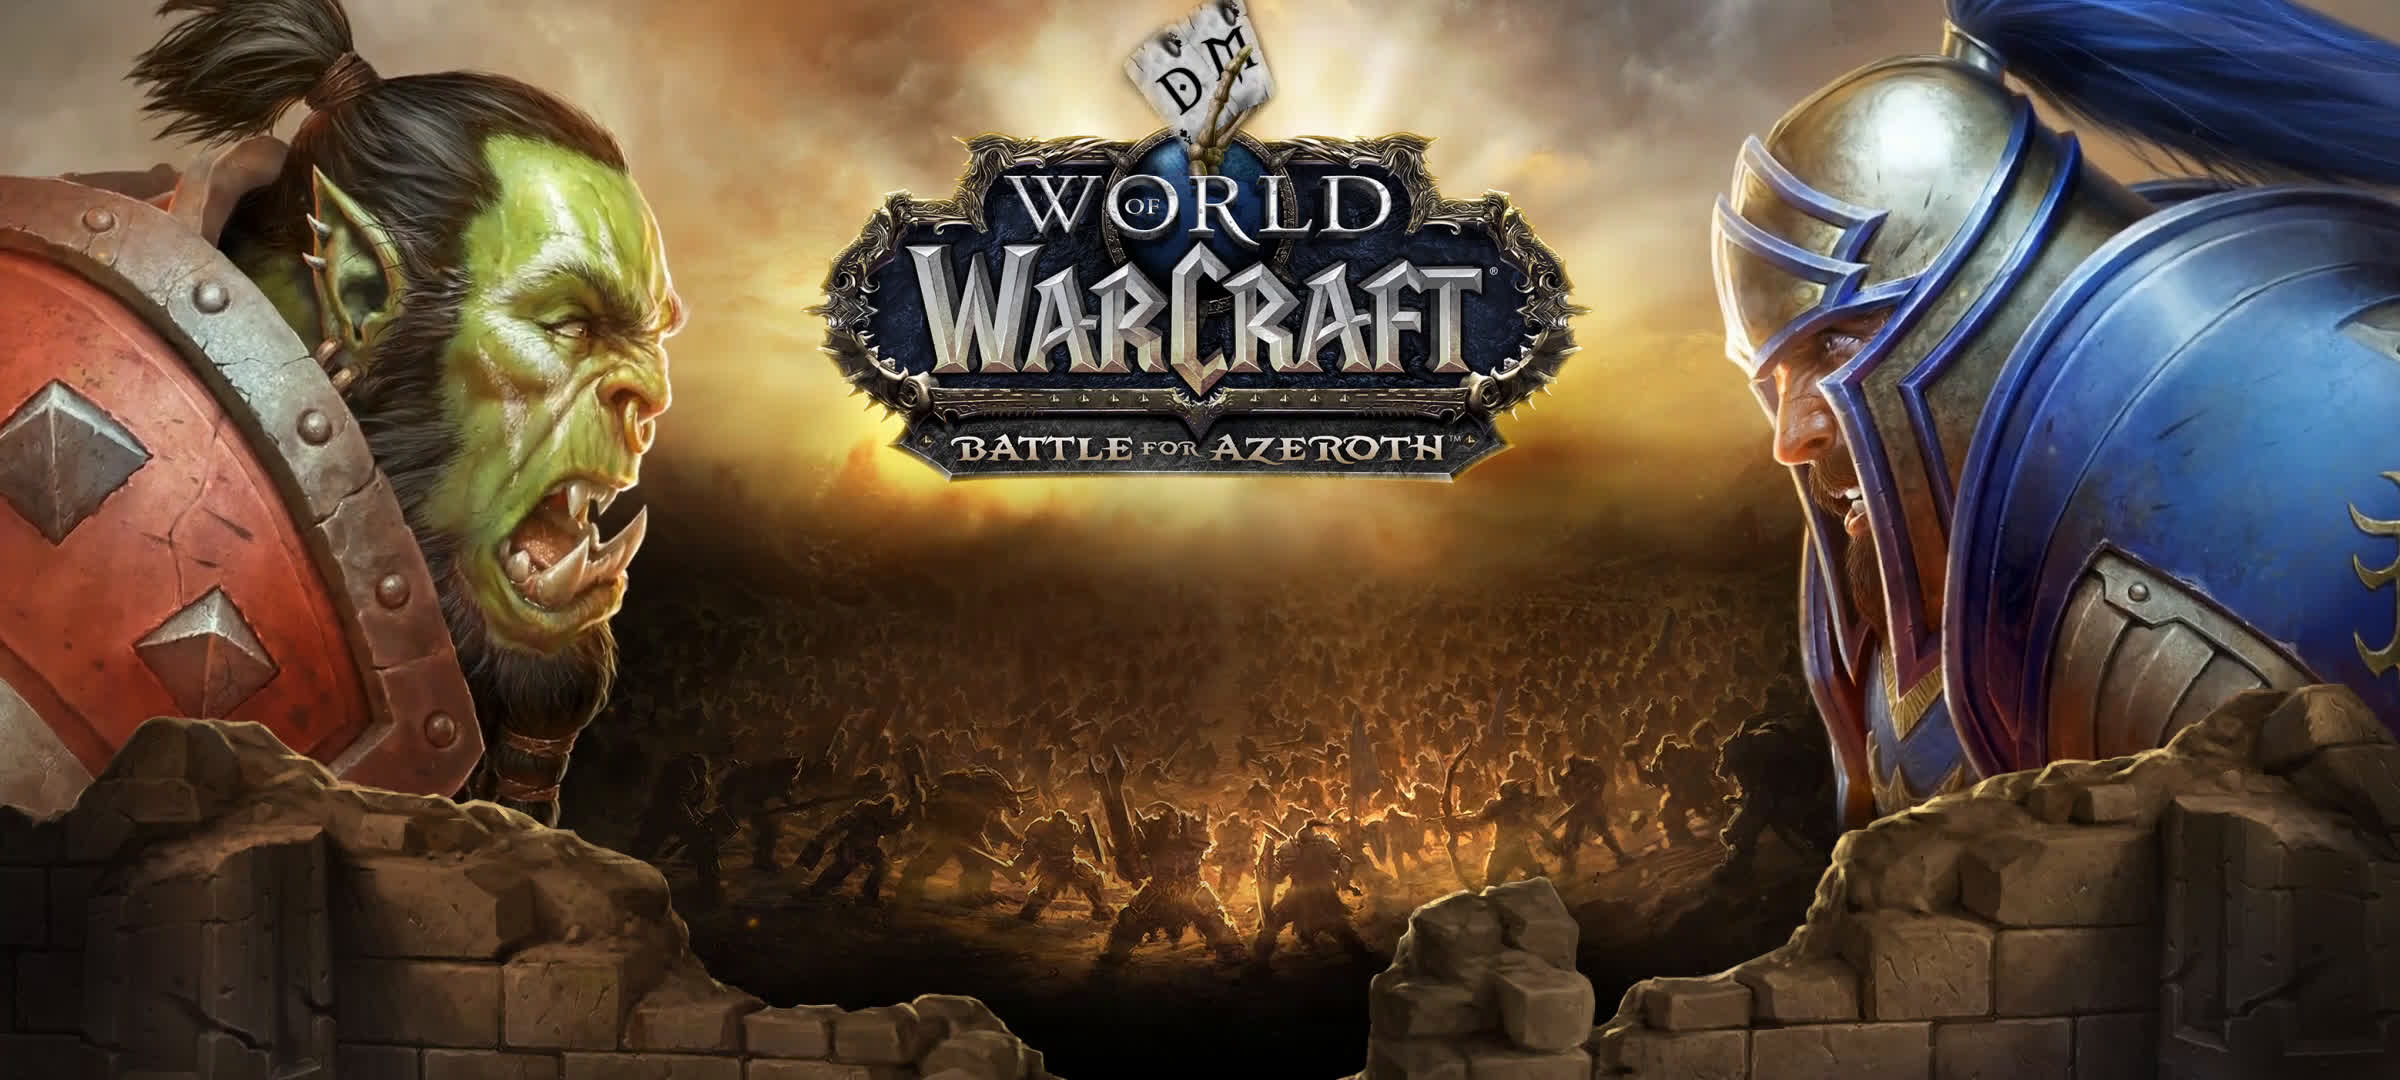 world of warcraft battle for azeroth pc game free download